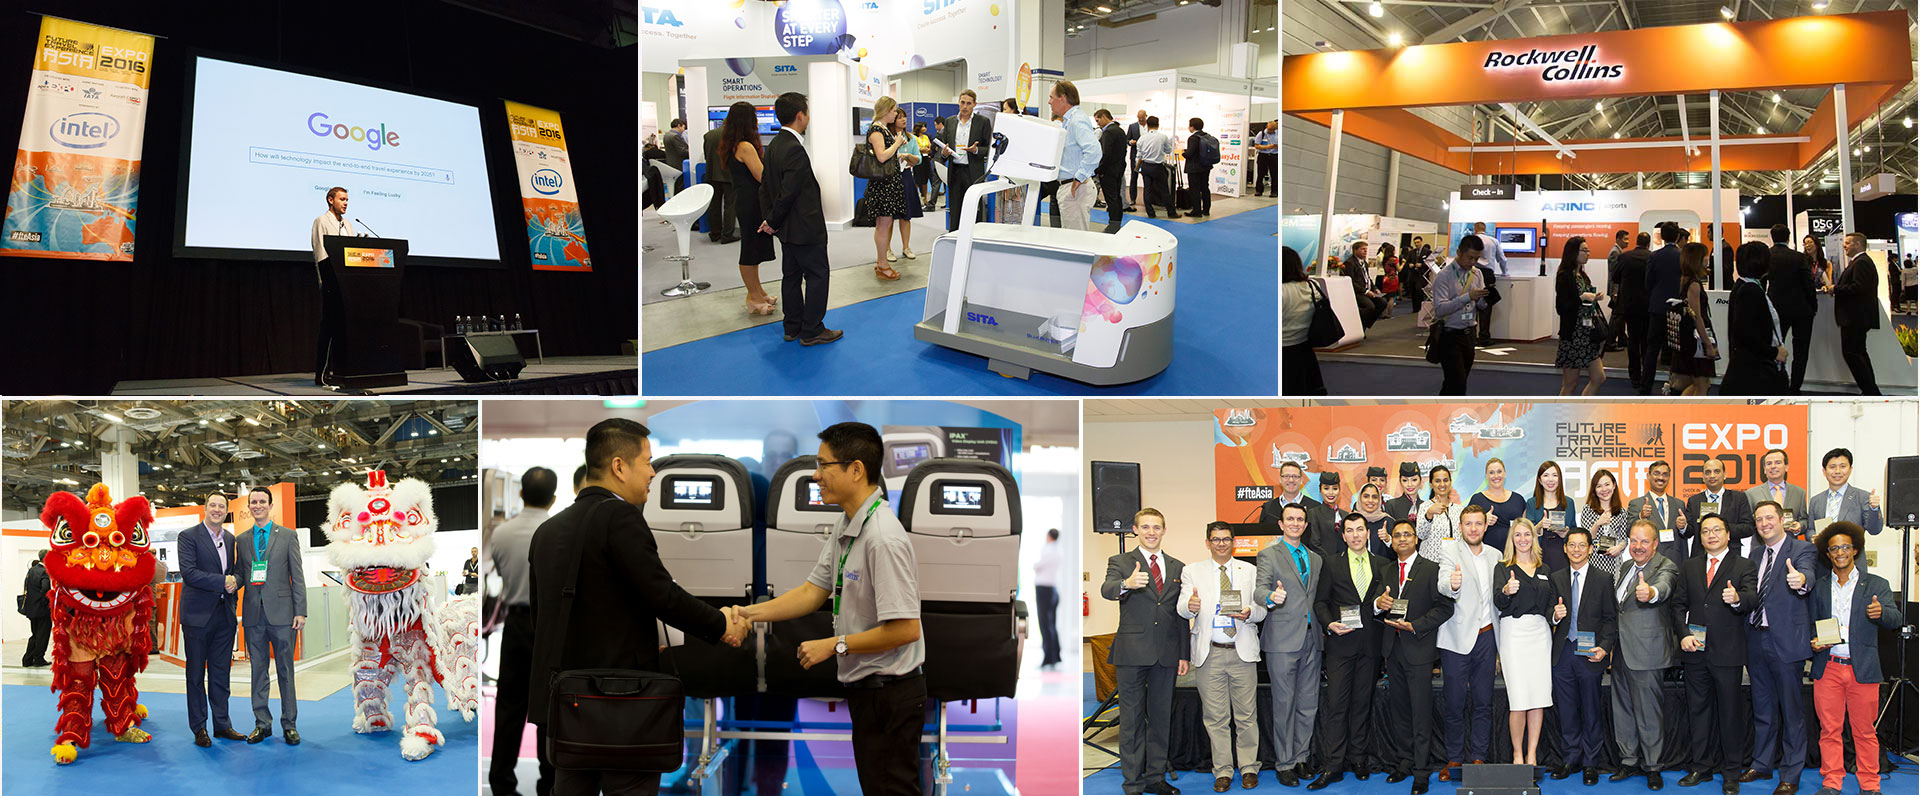 Asia's Air Passenger Experience event | FTE Asia EXPO 2017